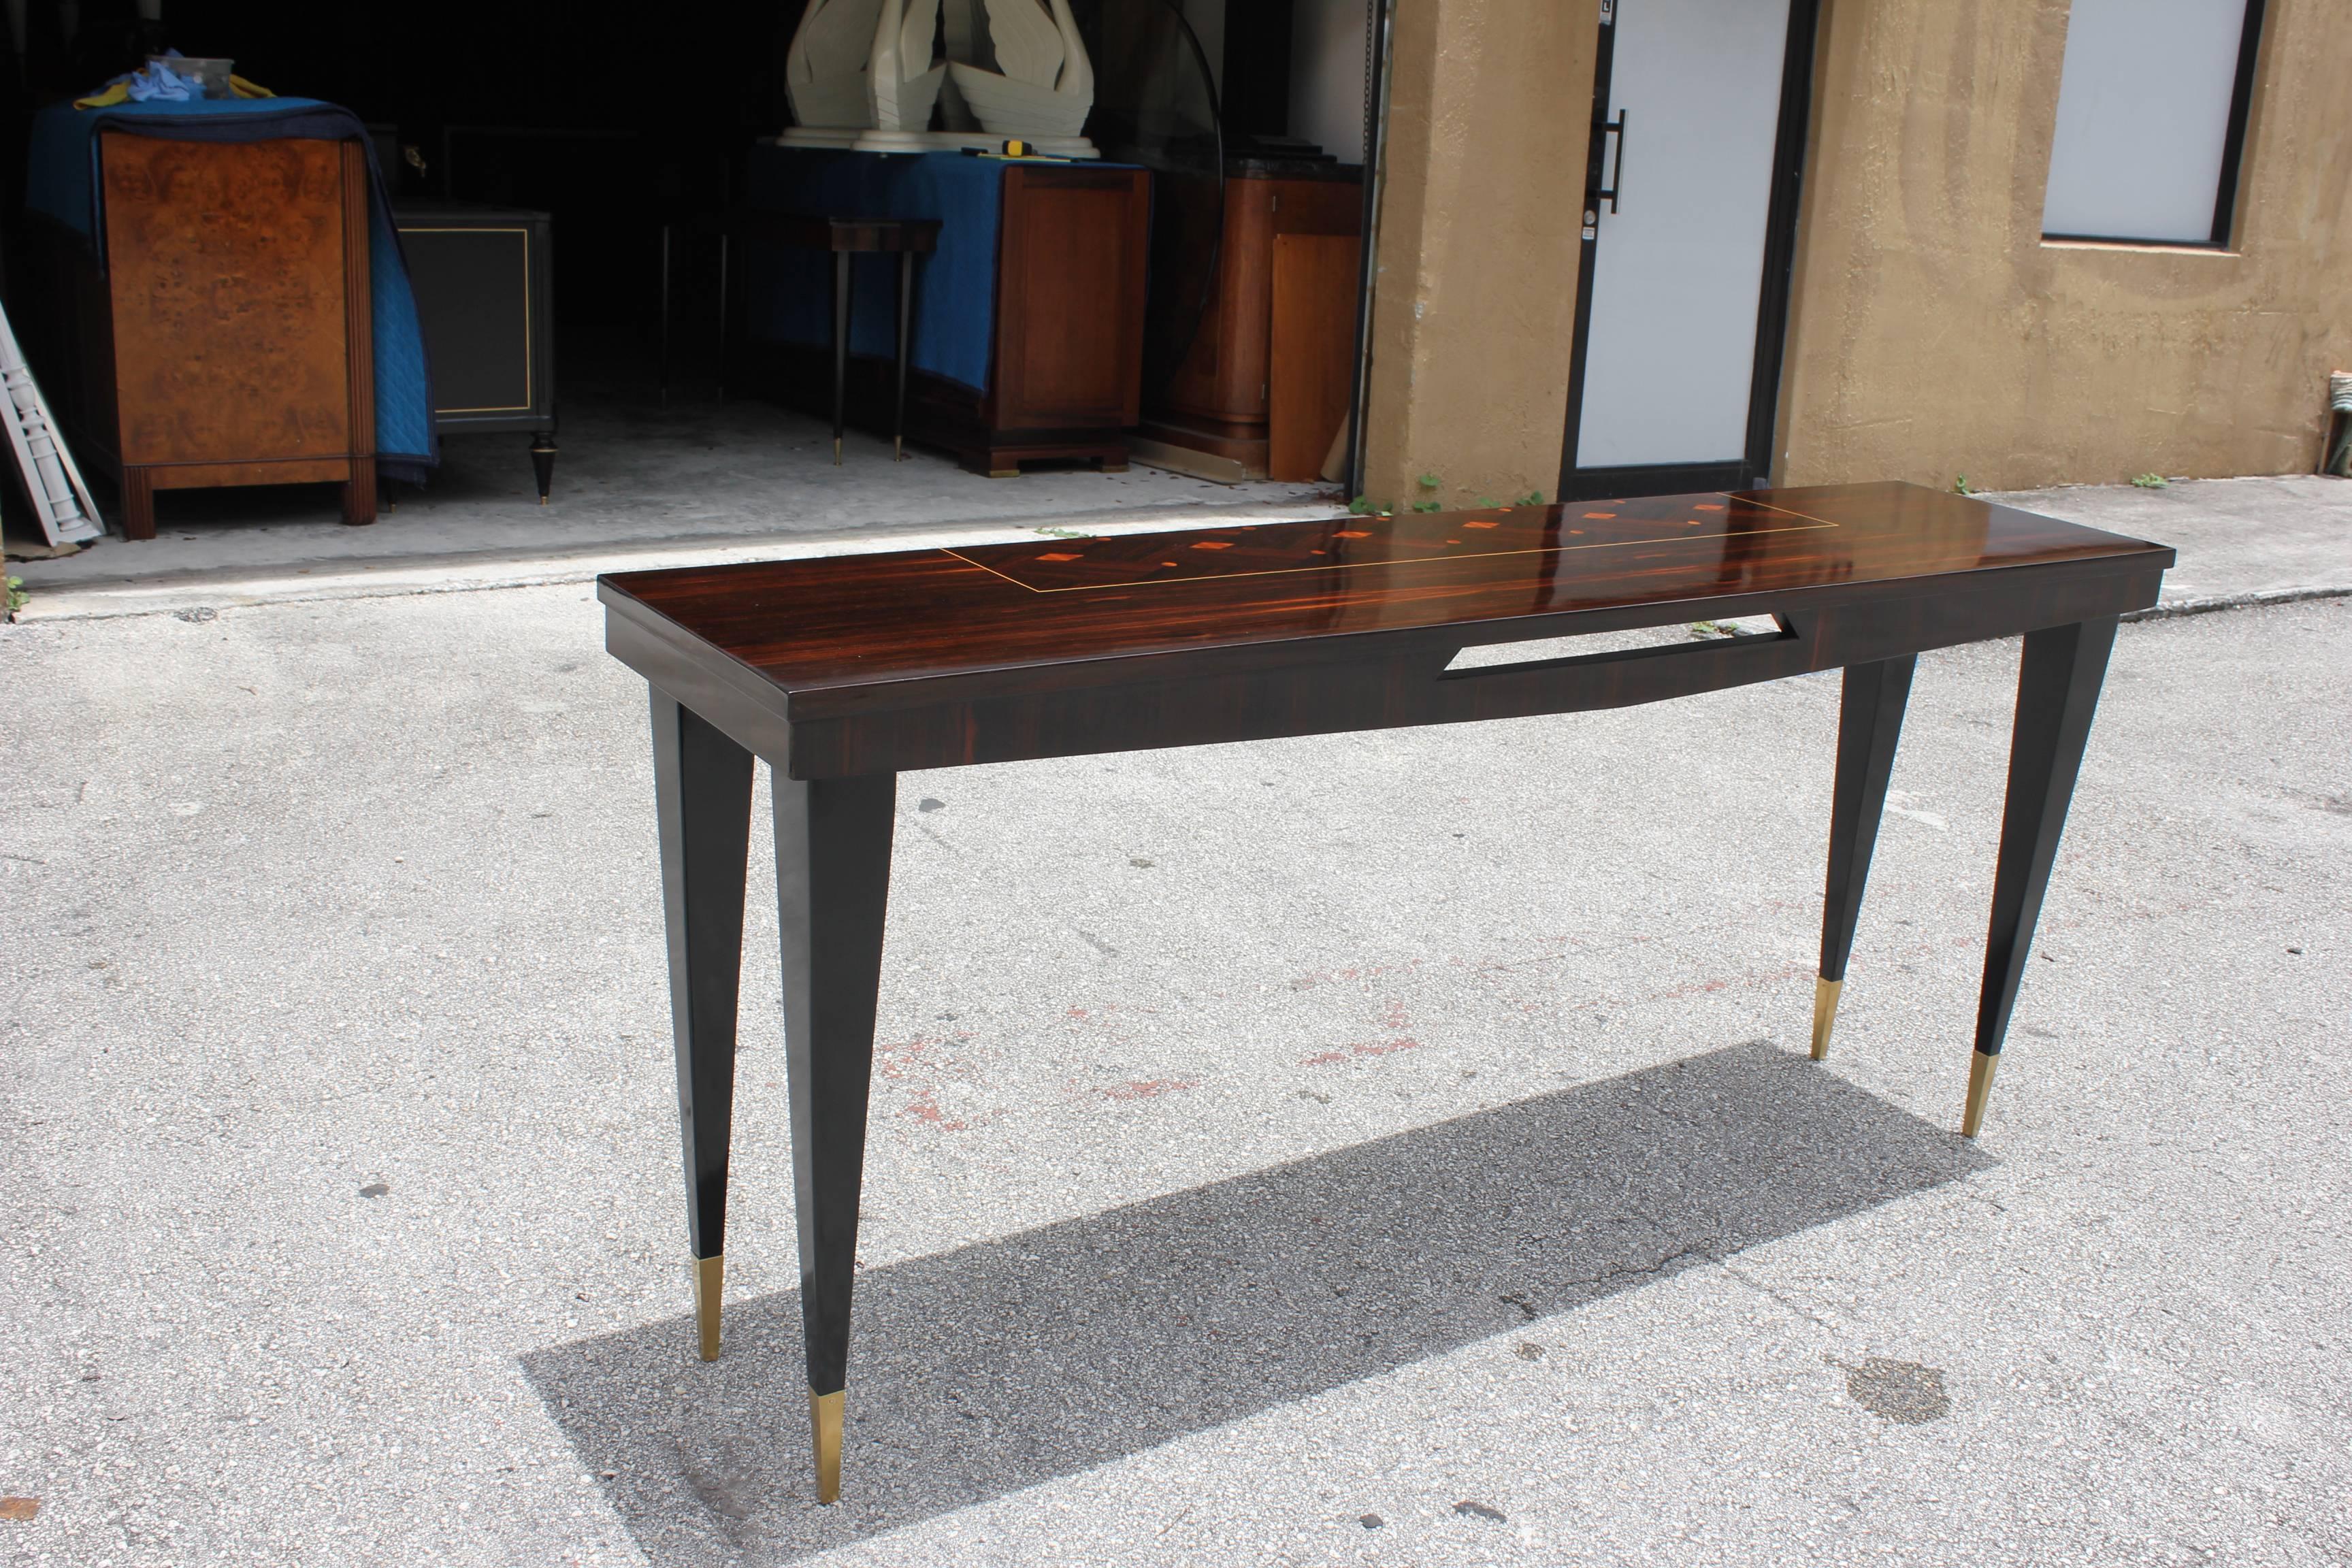 A beautiful French Art Deco exotic Macassar ebony steeped console table, circa 1940s. With black lacquer legs, and brass toe caps with diamond inlaid top, high gloss lacquer finish, the console table are in perfect condition. Size: 66.25 W x 30 H x